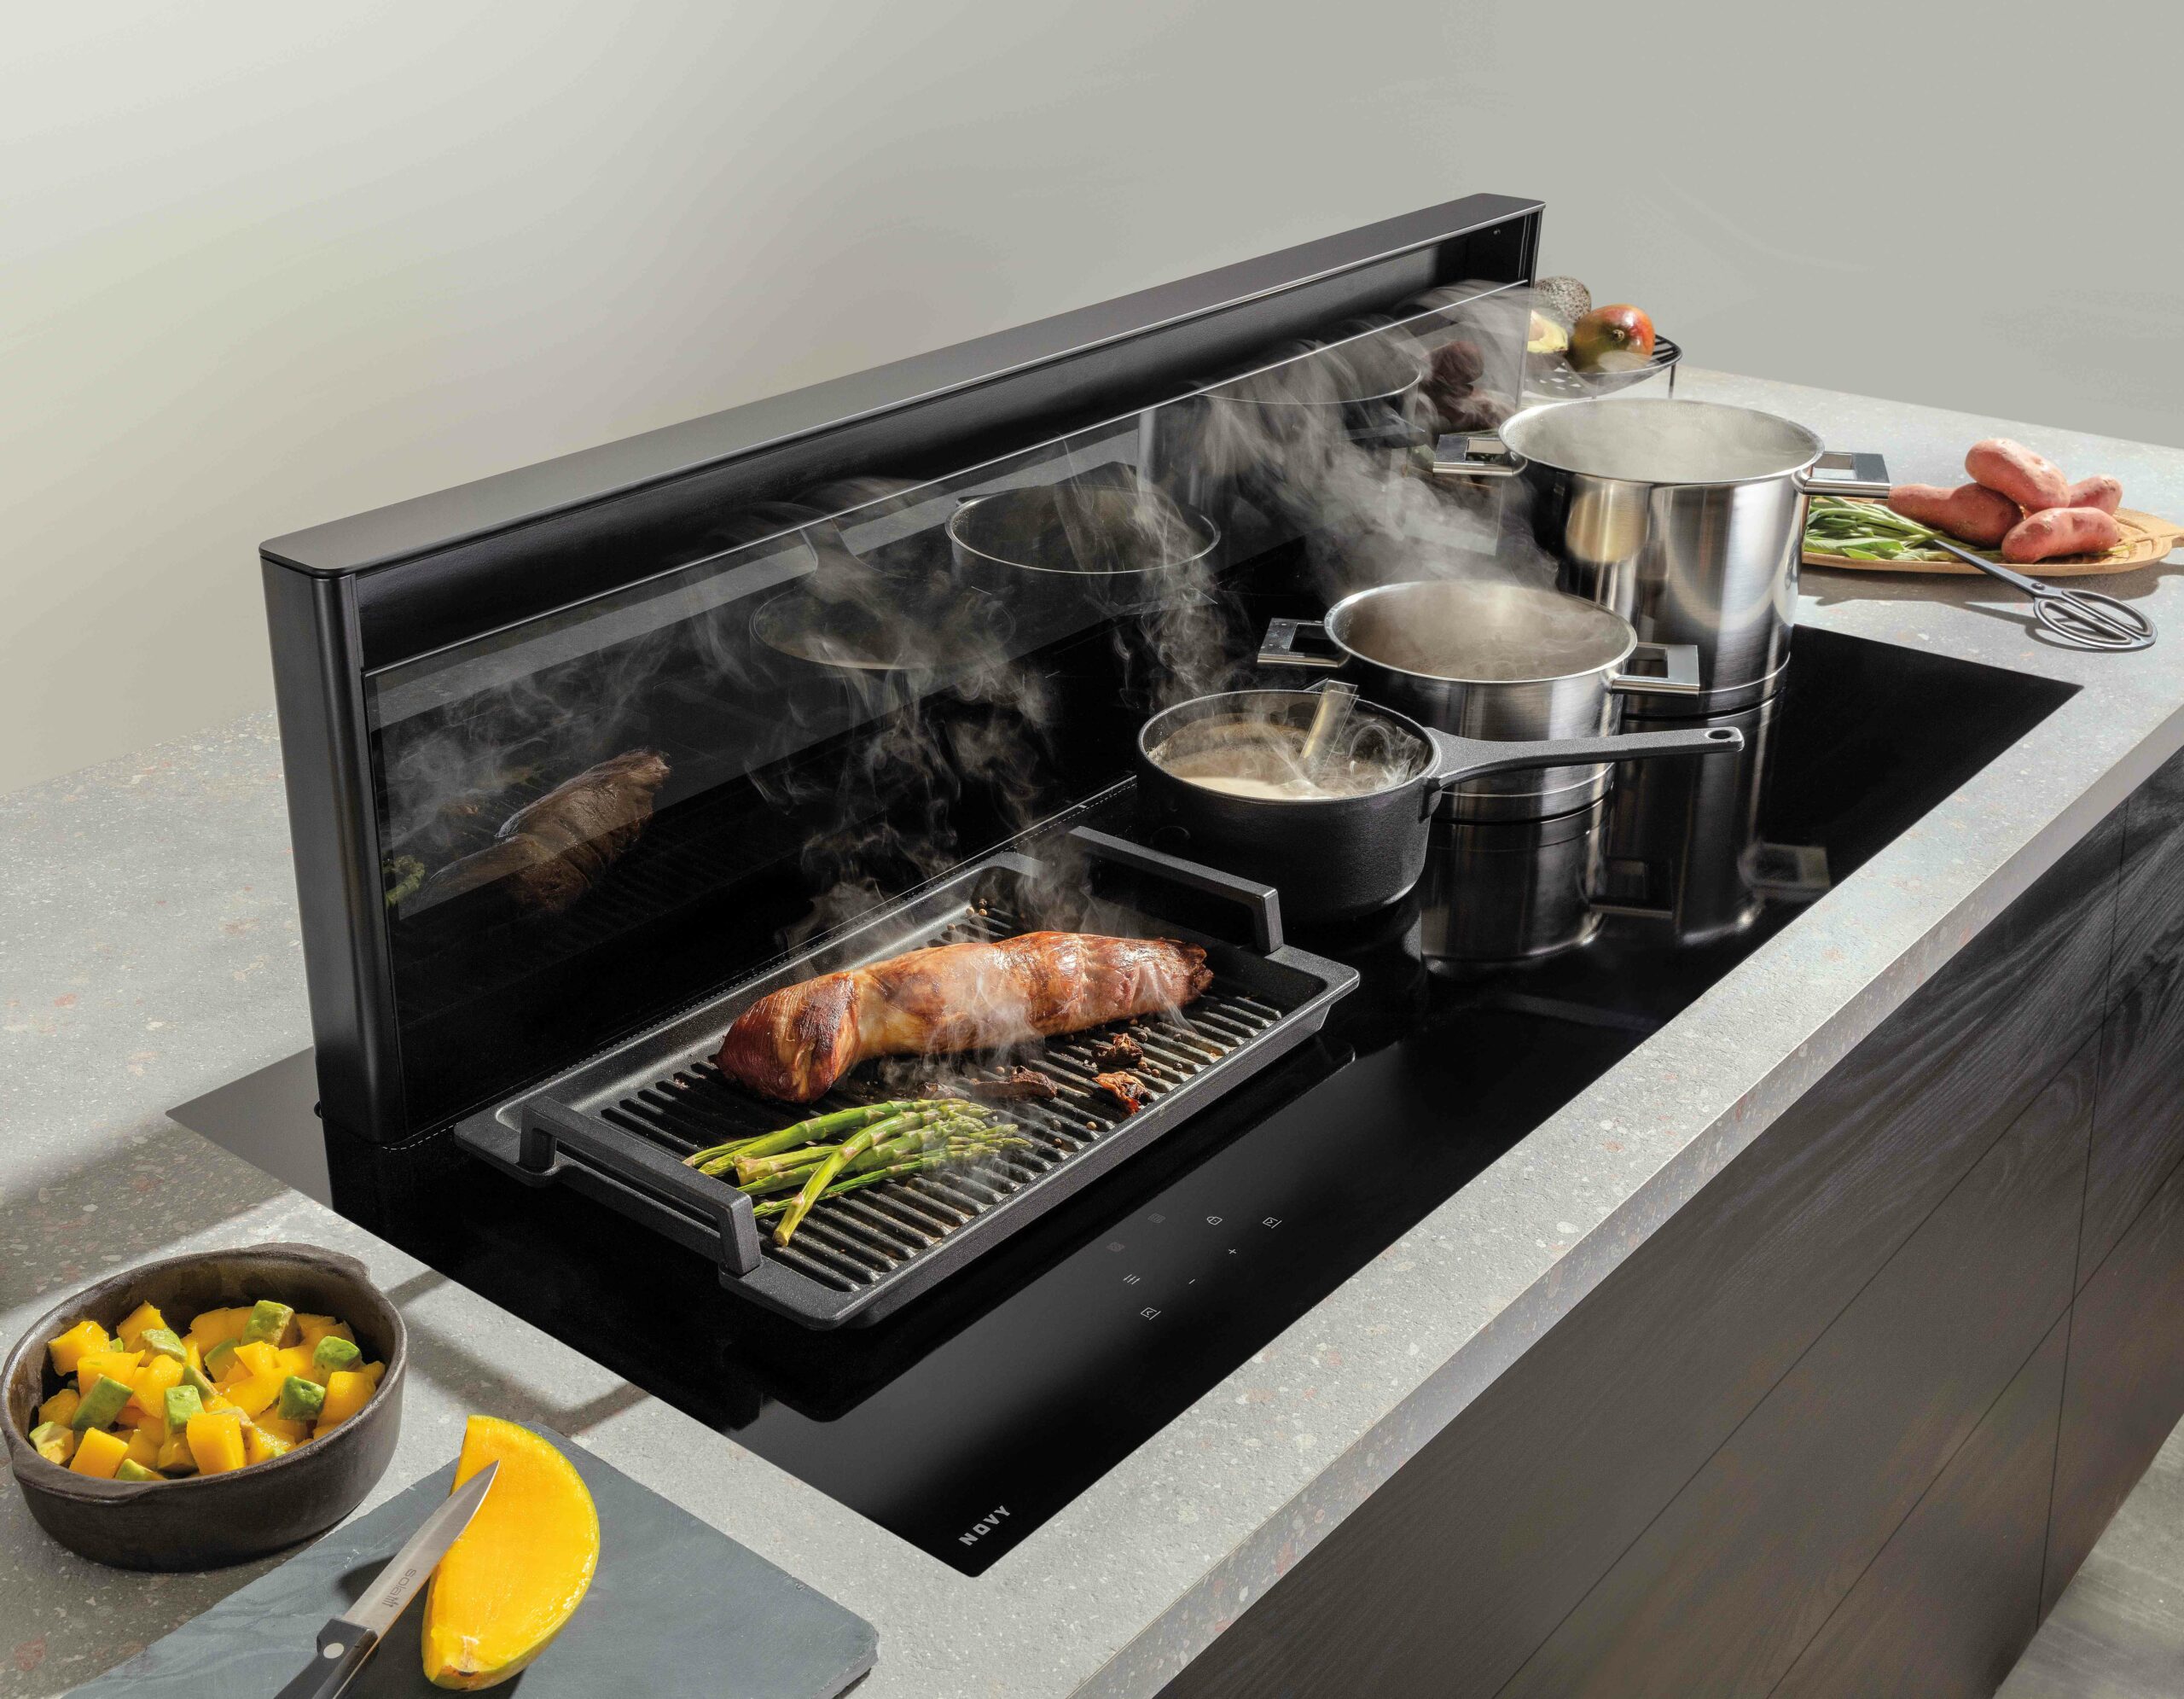 Novy adds new 120cm downdraft extractor induction hob